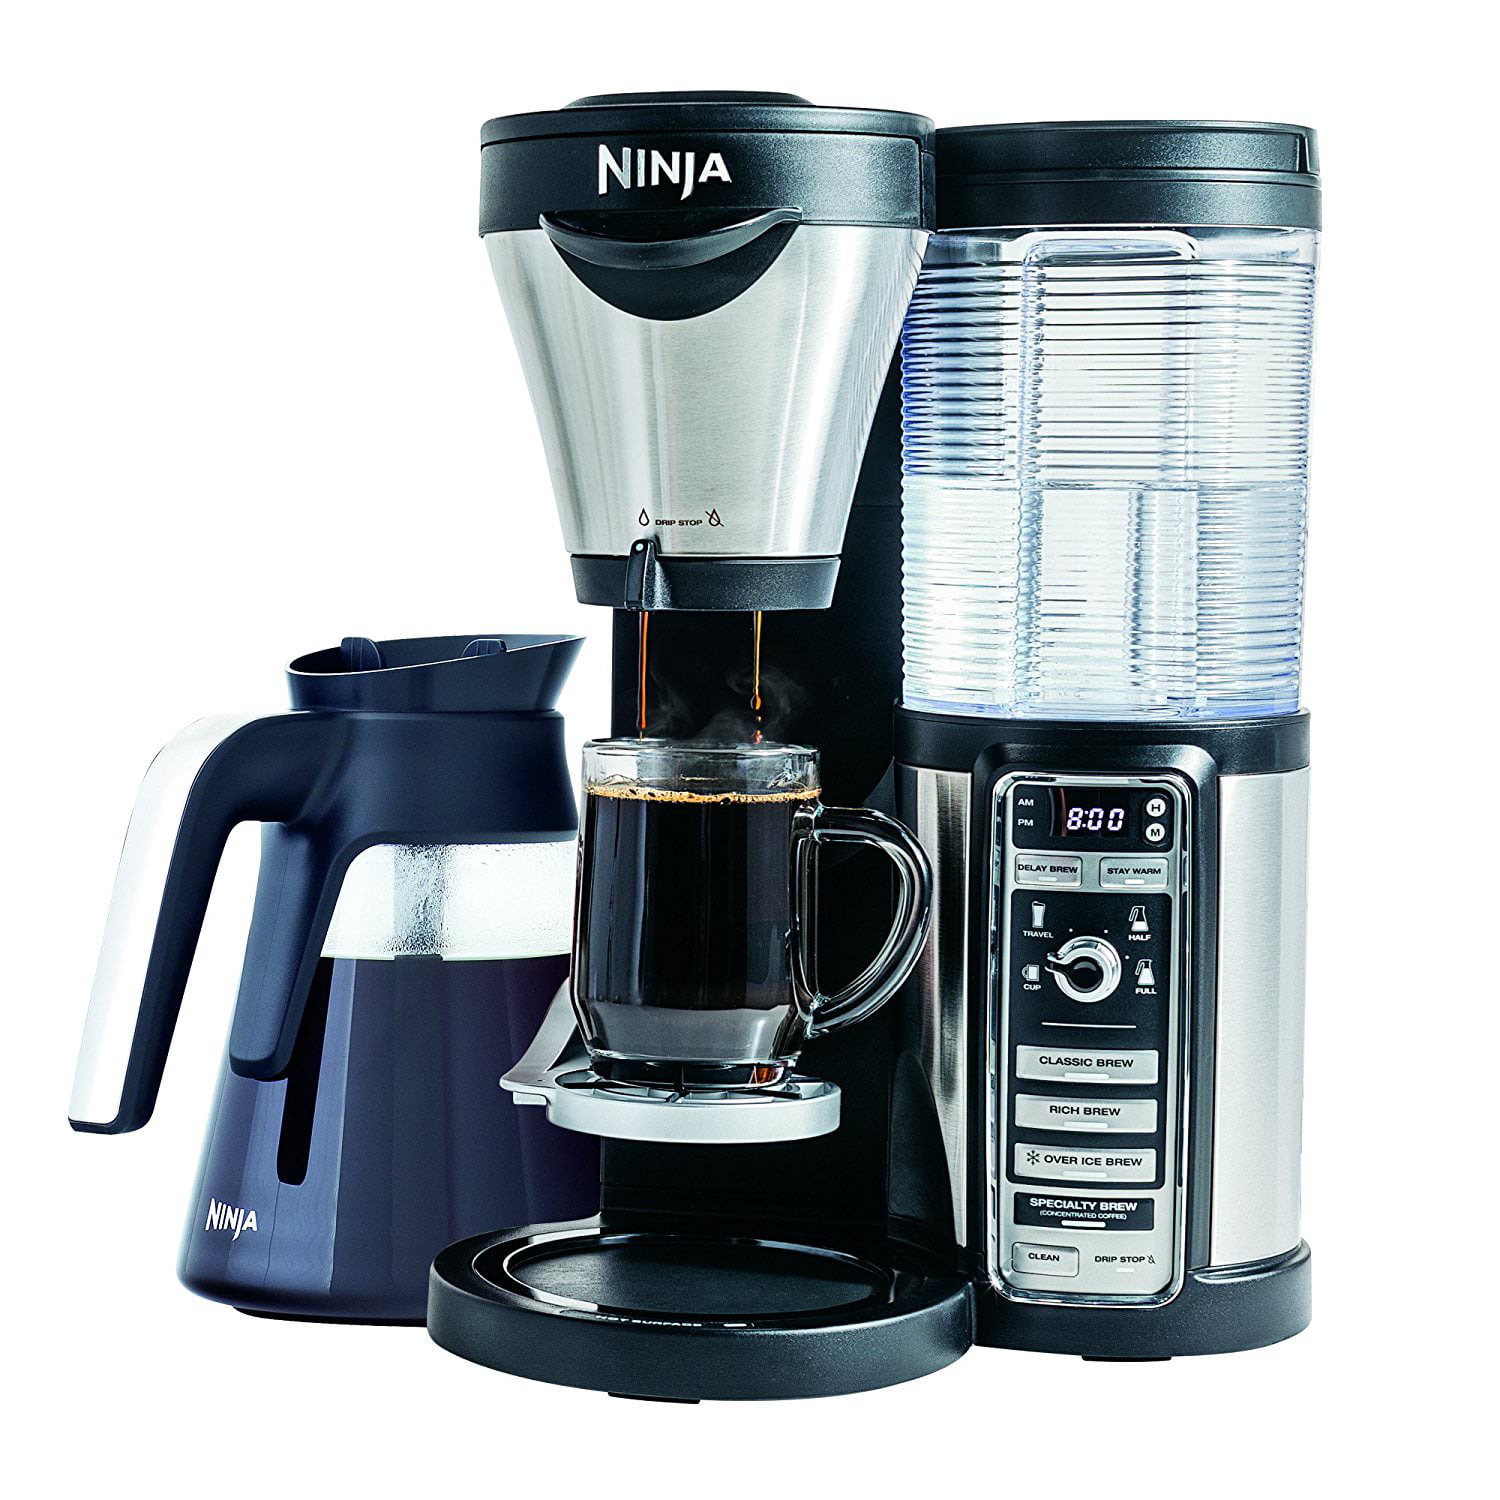 Restored Ninja Coffee Maker for Hot/Iced Coffee with 4 Brew Sizes